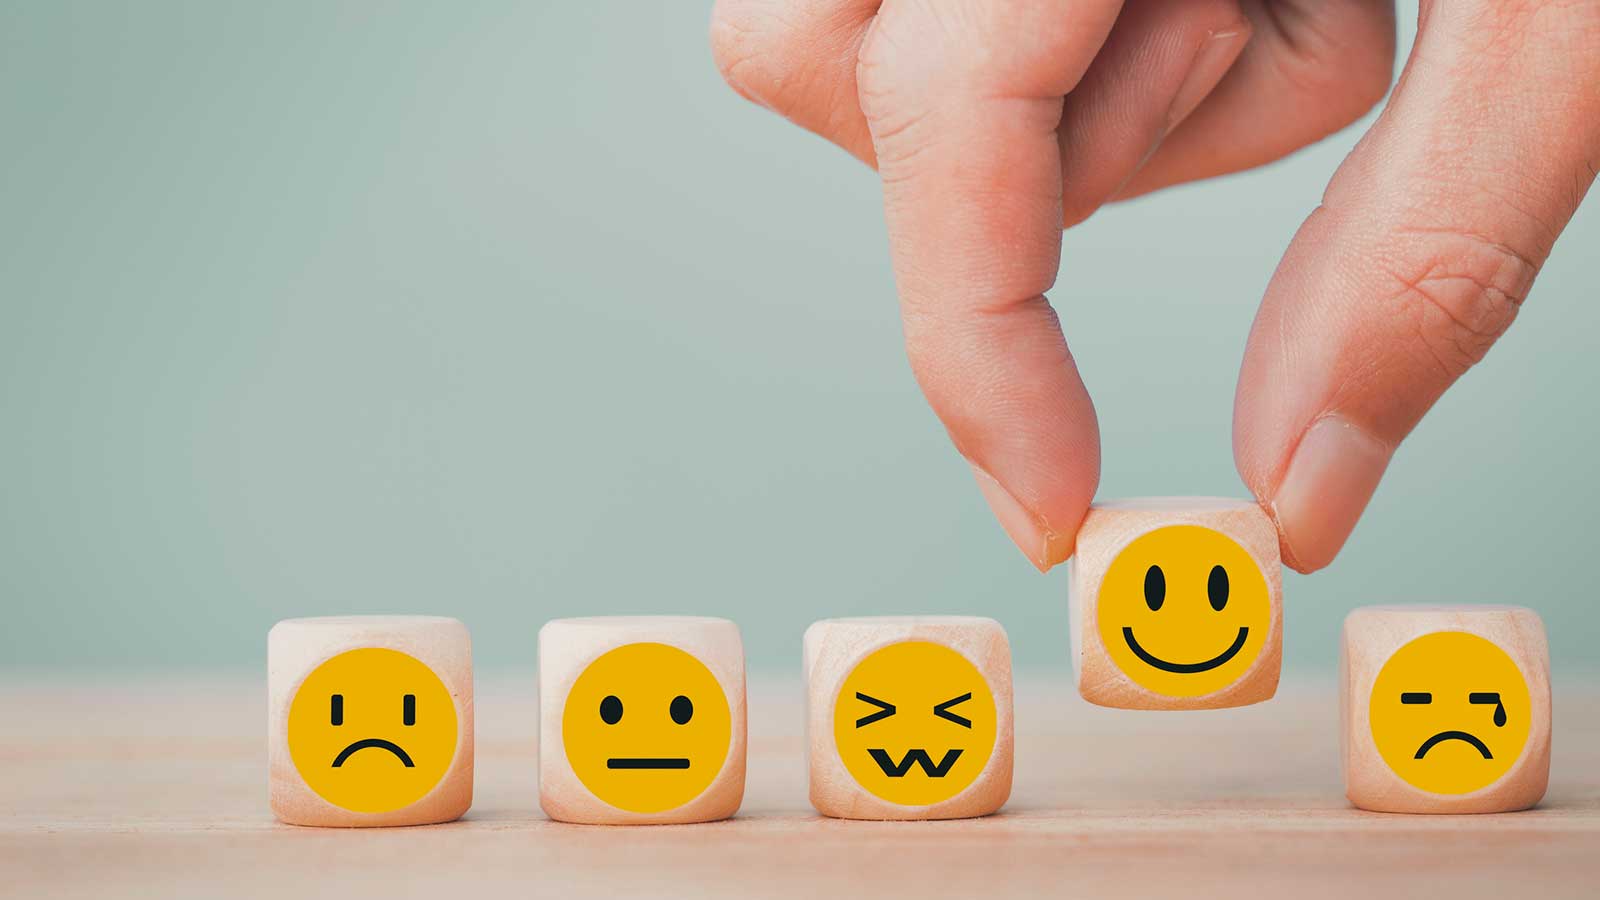 Blocks with different emotional expressions on them, holding up a smiley face, regulate strong emotions